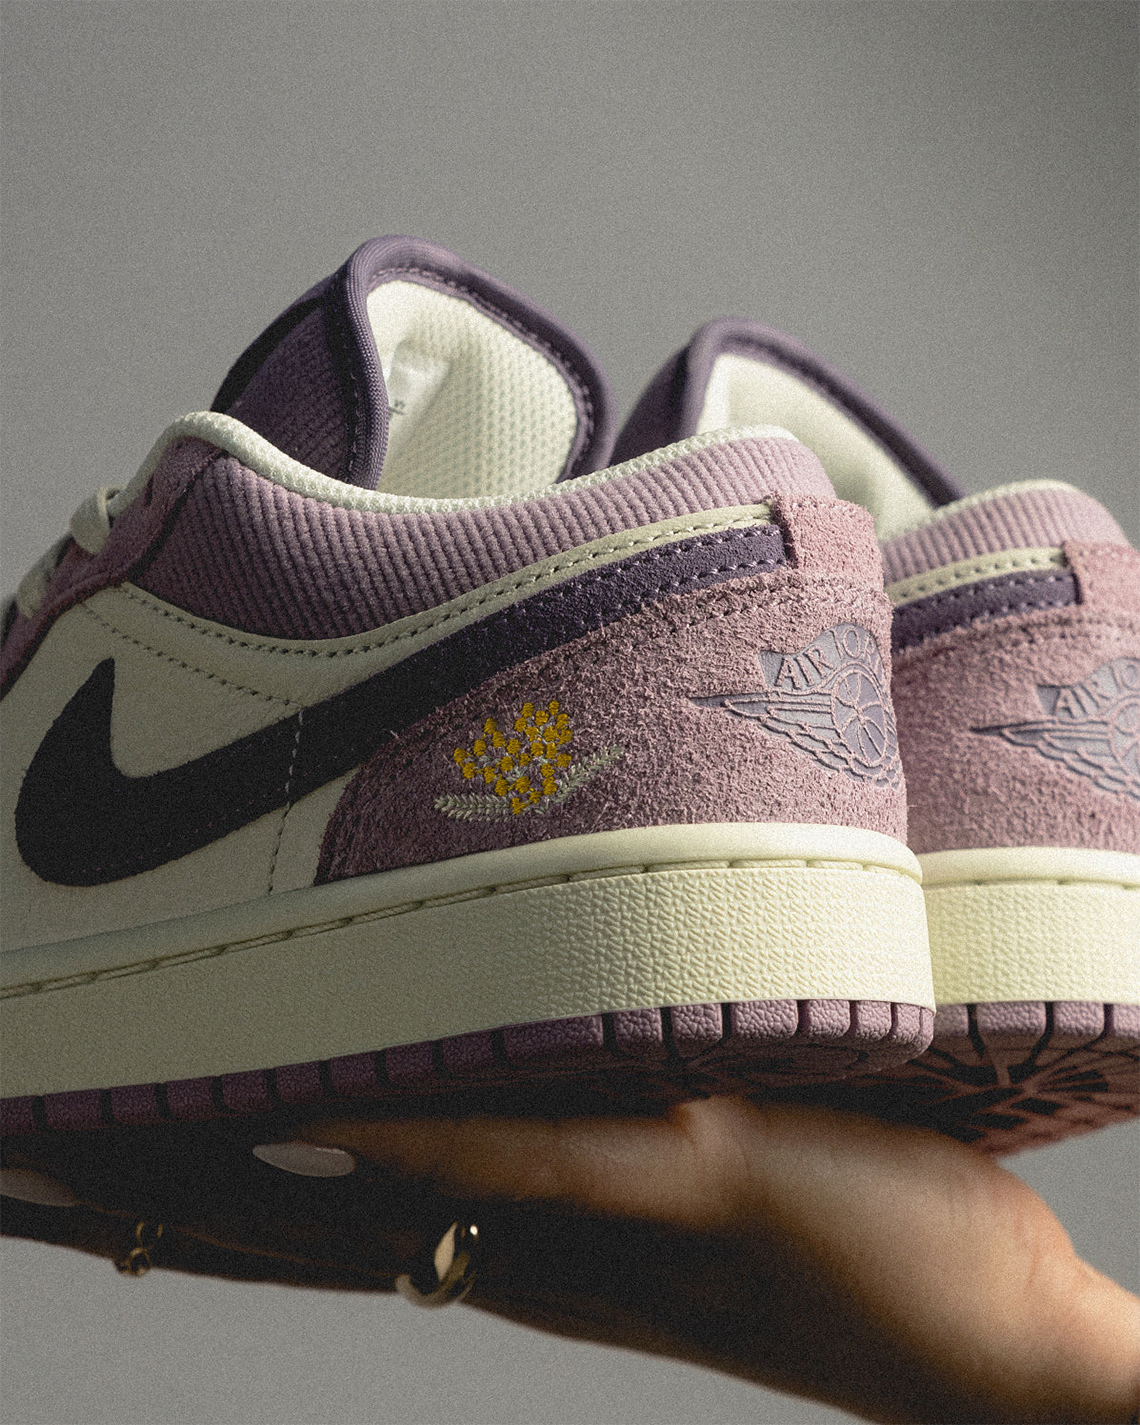 Jordan Brand introduces the all-new women's Air Jordan 1 LV8D Elevated -  YOMZANSI. Documenting THE CULTURE